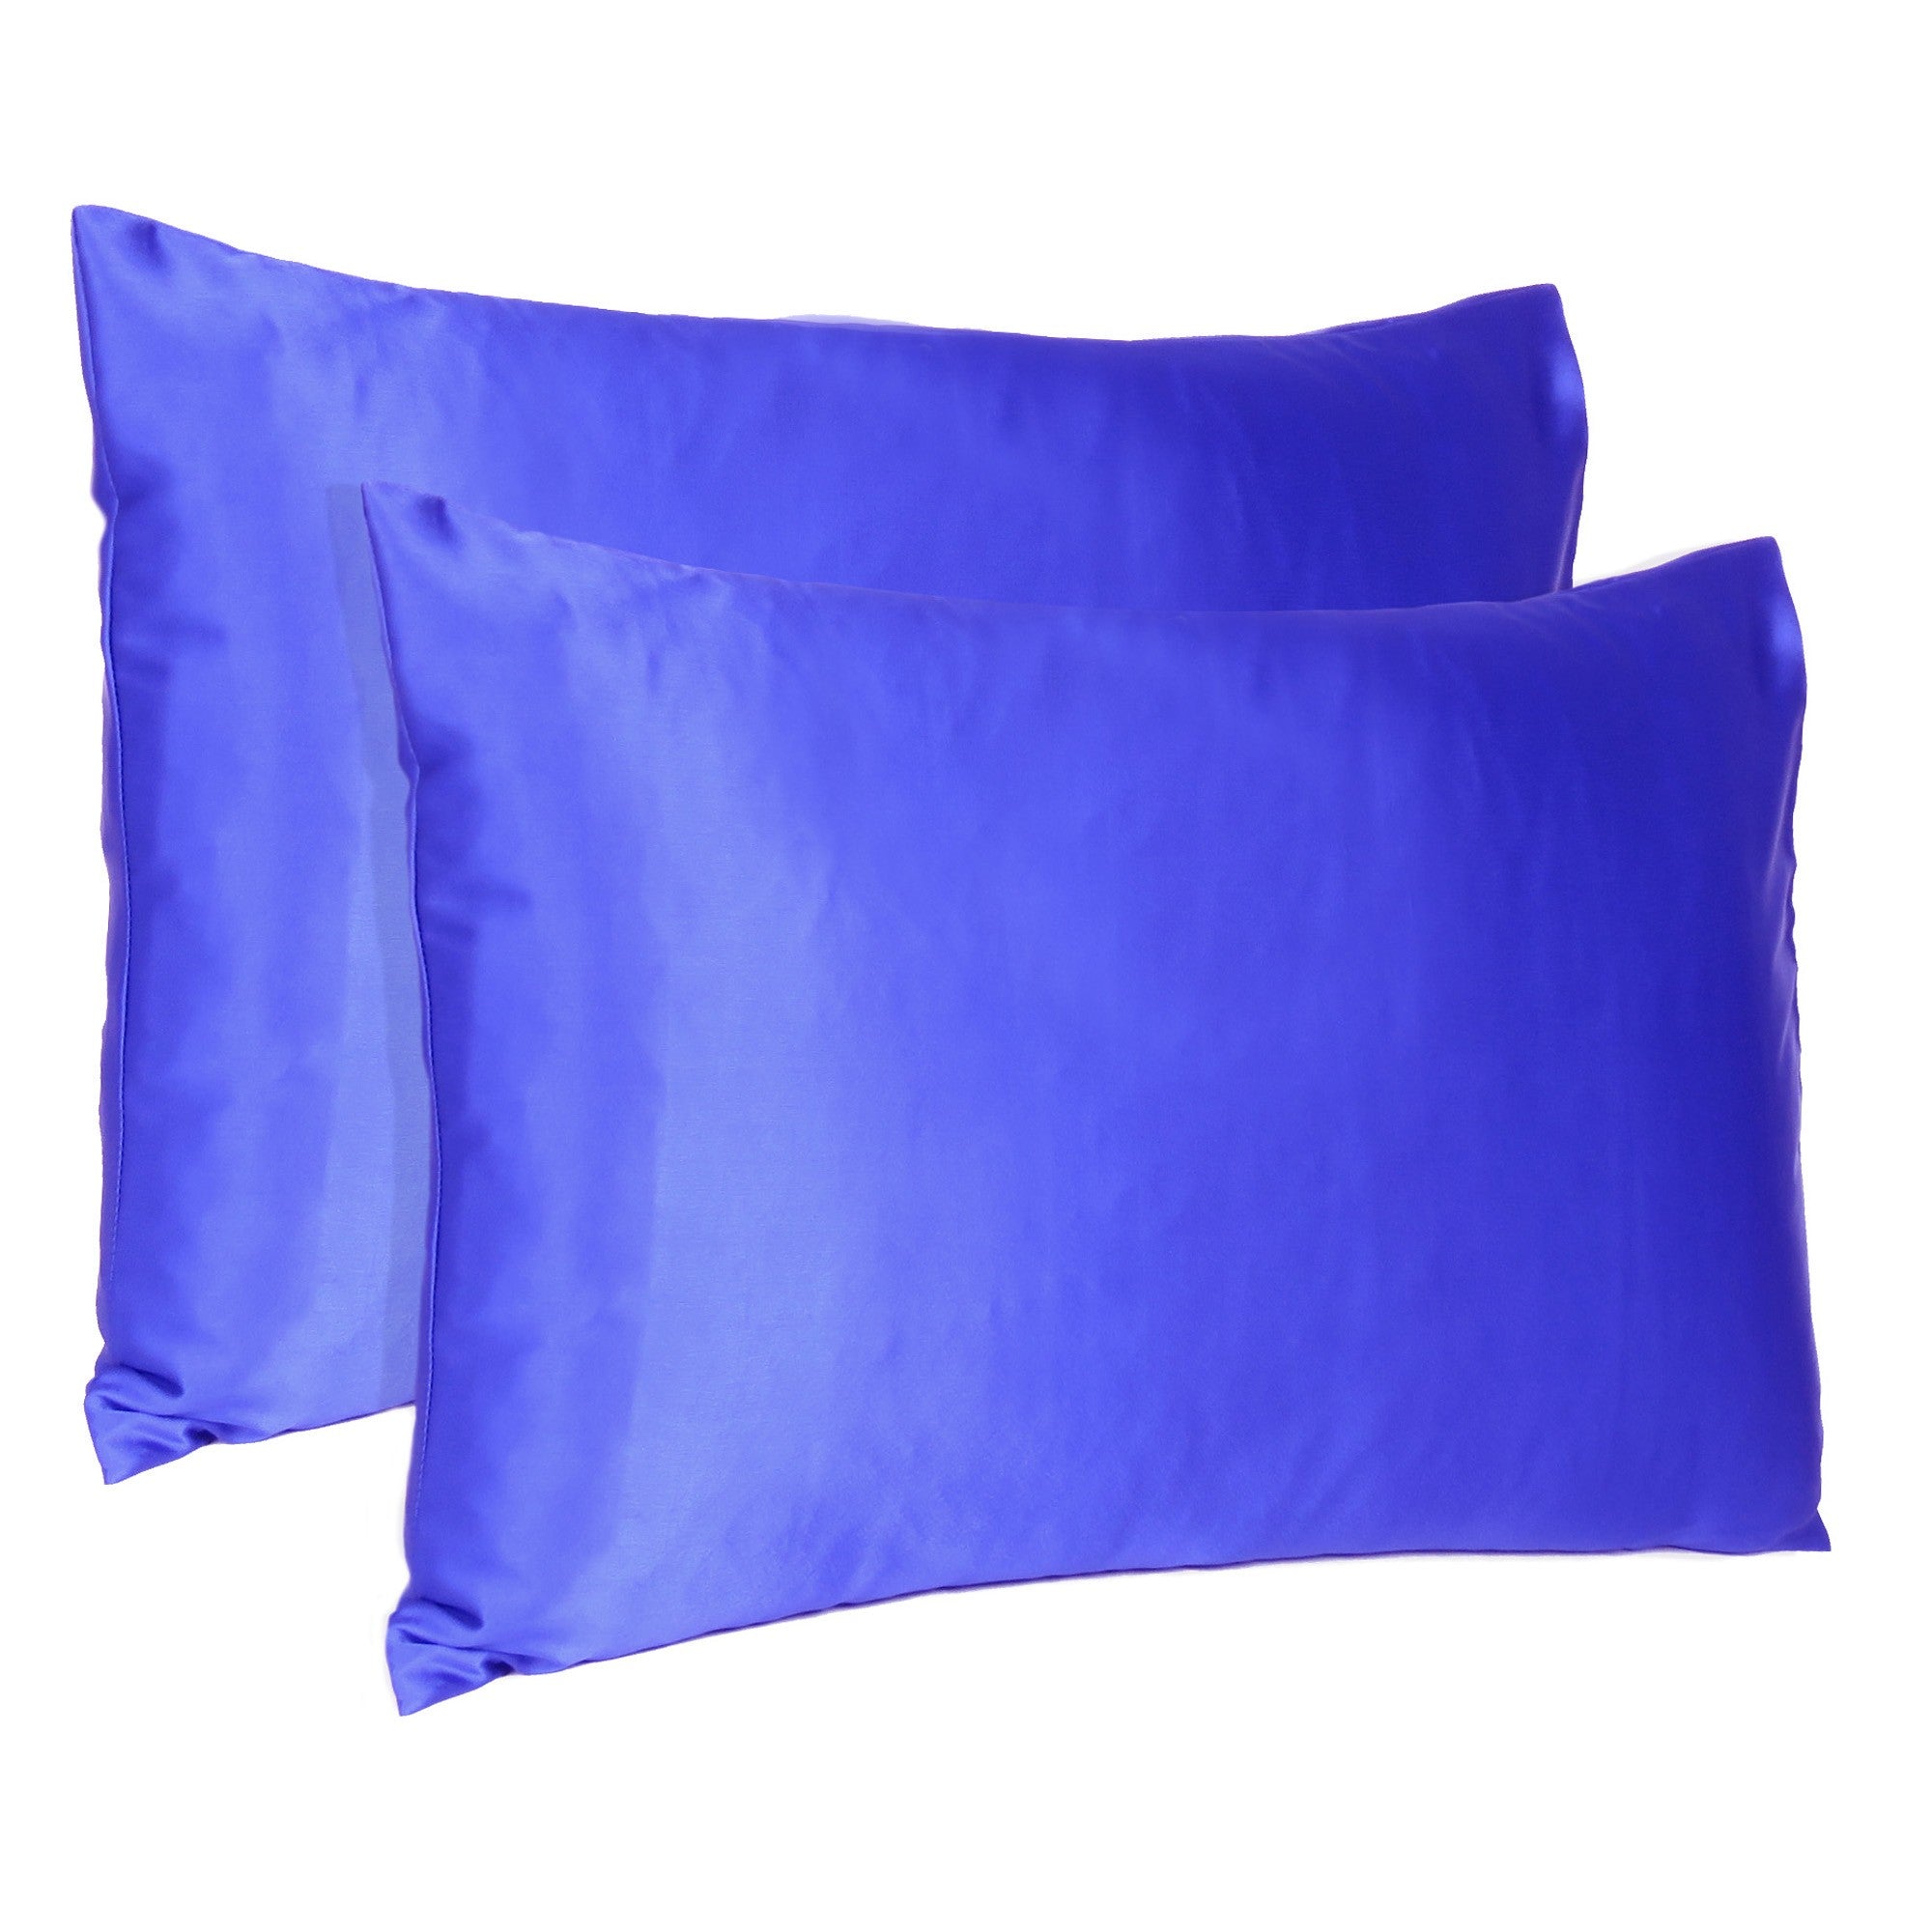 Royal-Blue-Dreamy-Set-Of-2-Silky-Satin-Queen-Pillowcases-Bed-Sheets